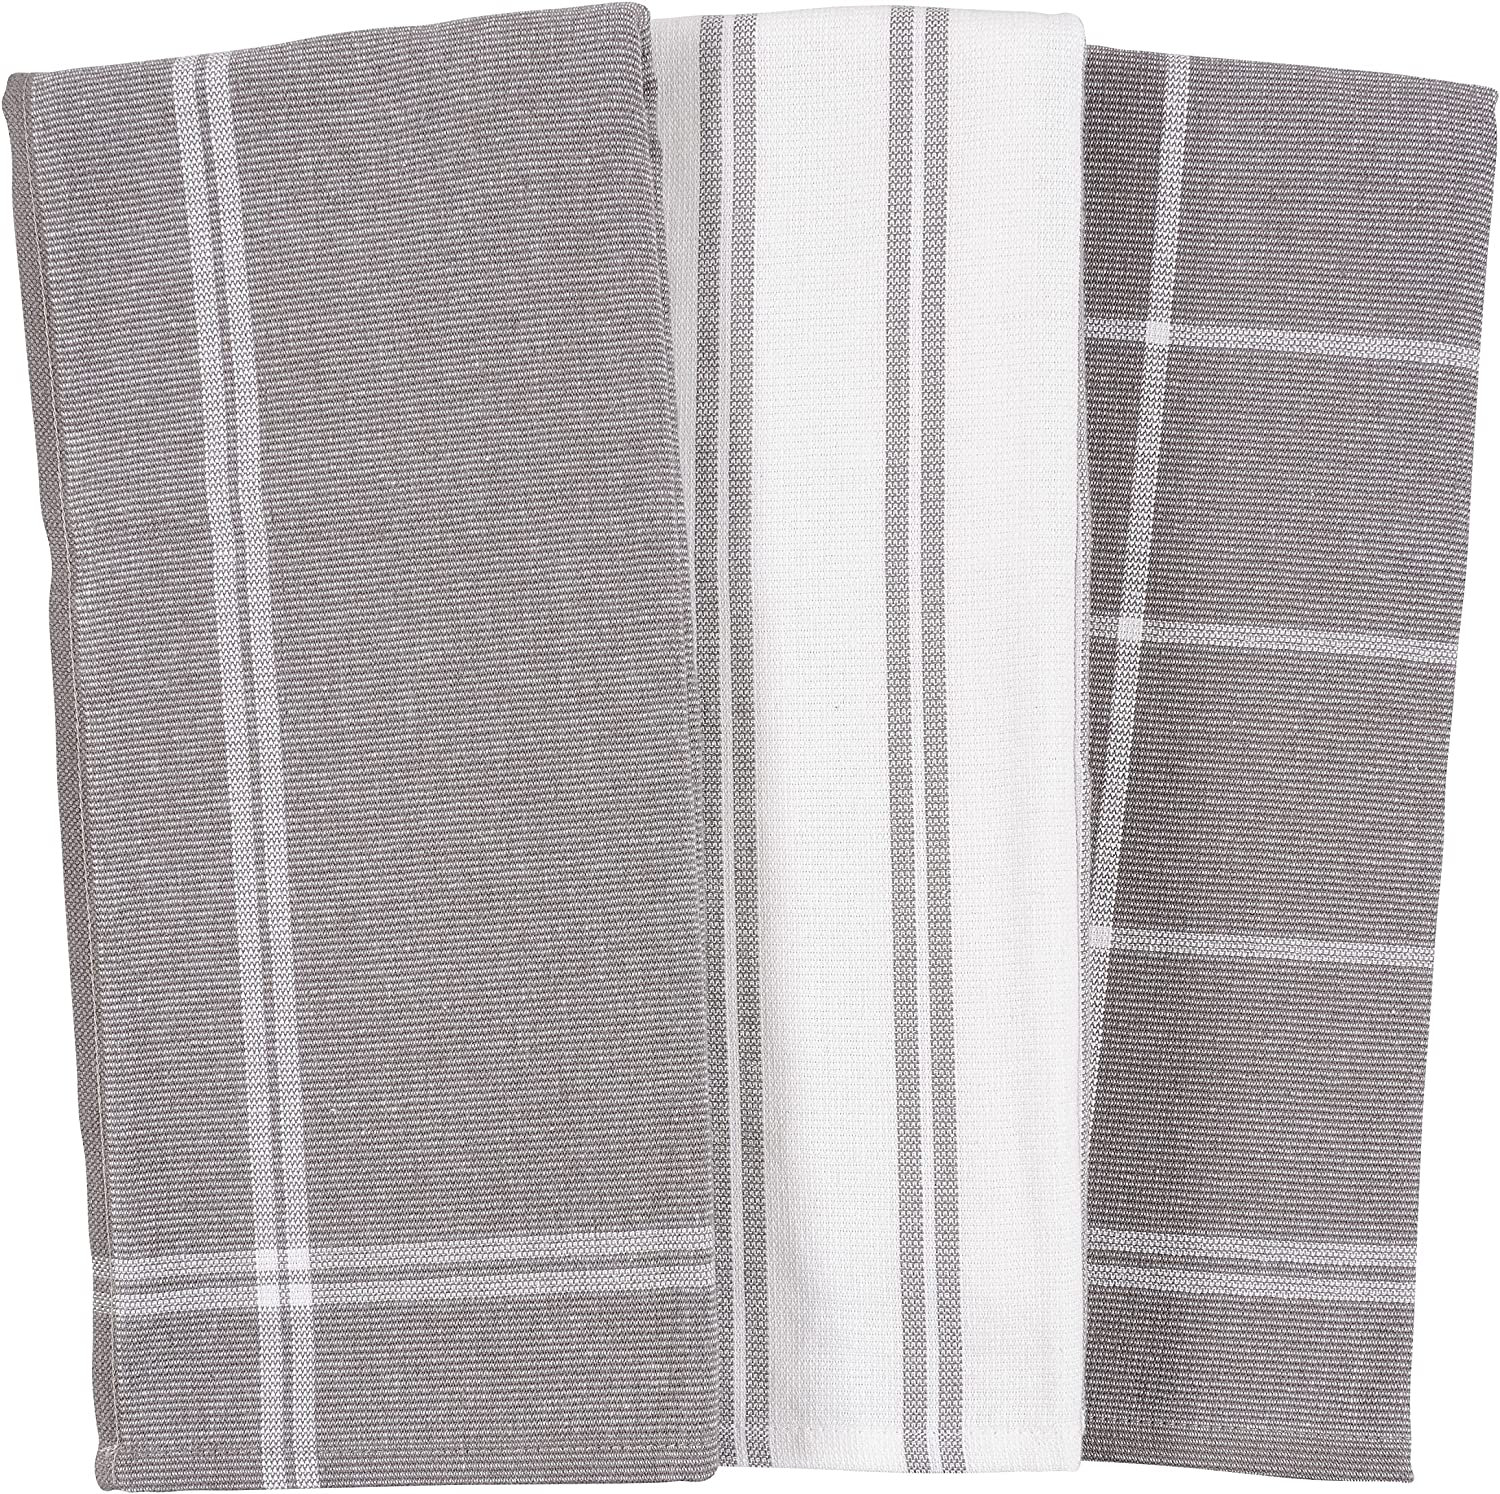 Ruvanti 6 Pack 100% Cotton 15x29 inch Kitchen Towels, Dish Towels for Kitchen, Soft, Washable, Super Absorbent Waffle Weave Tea Towels Linen Dishcloth